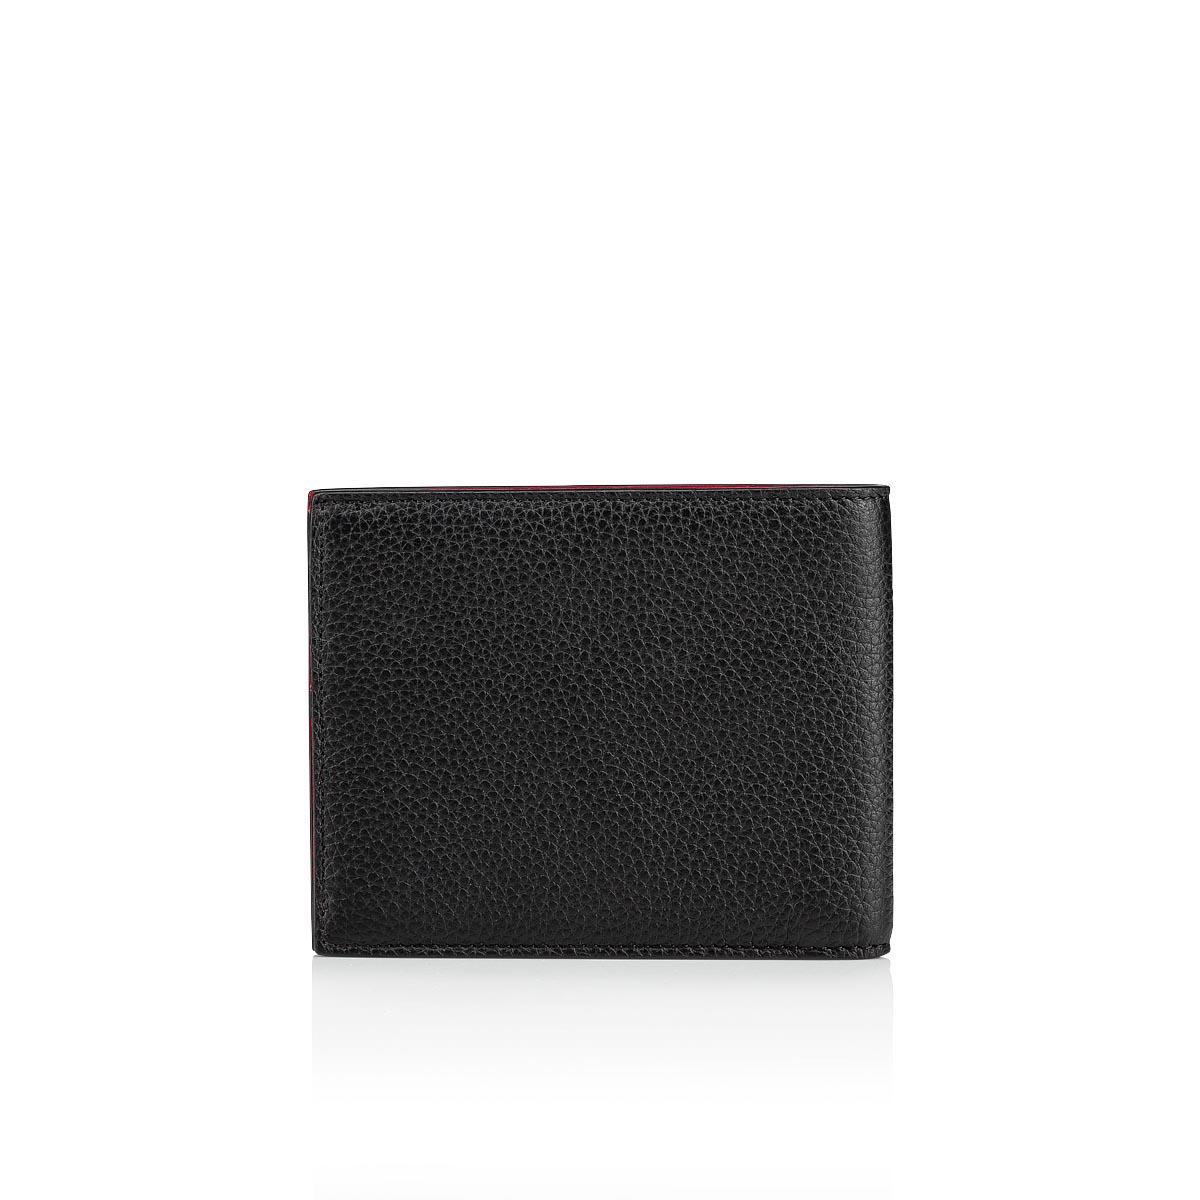 Coolcard Leather Bifold Wallet in Black - Christian Louboutin